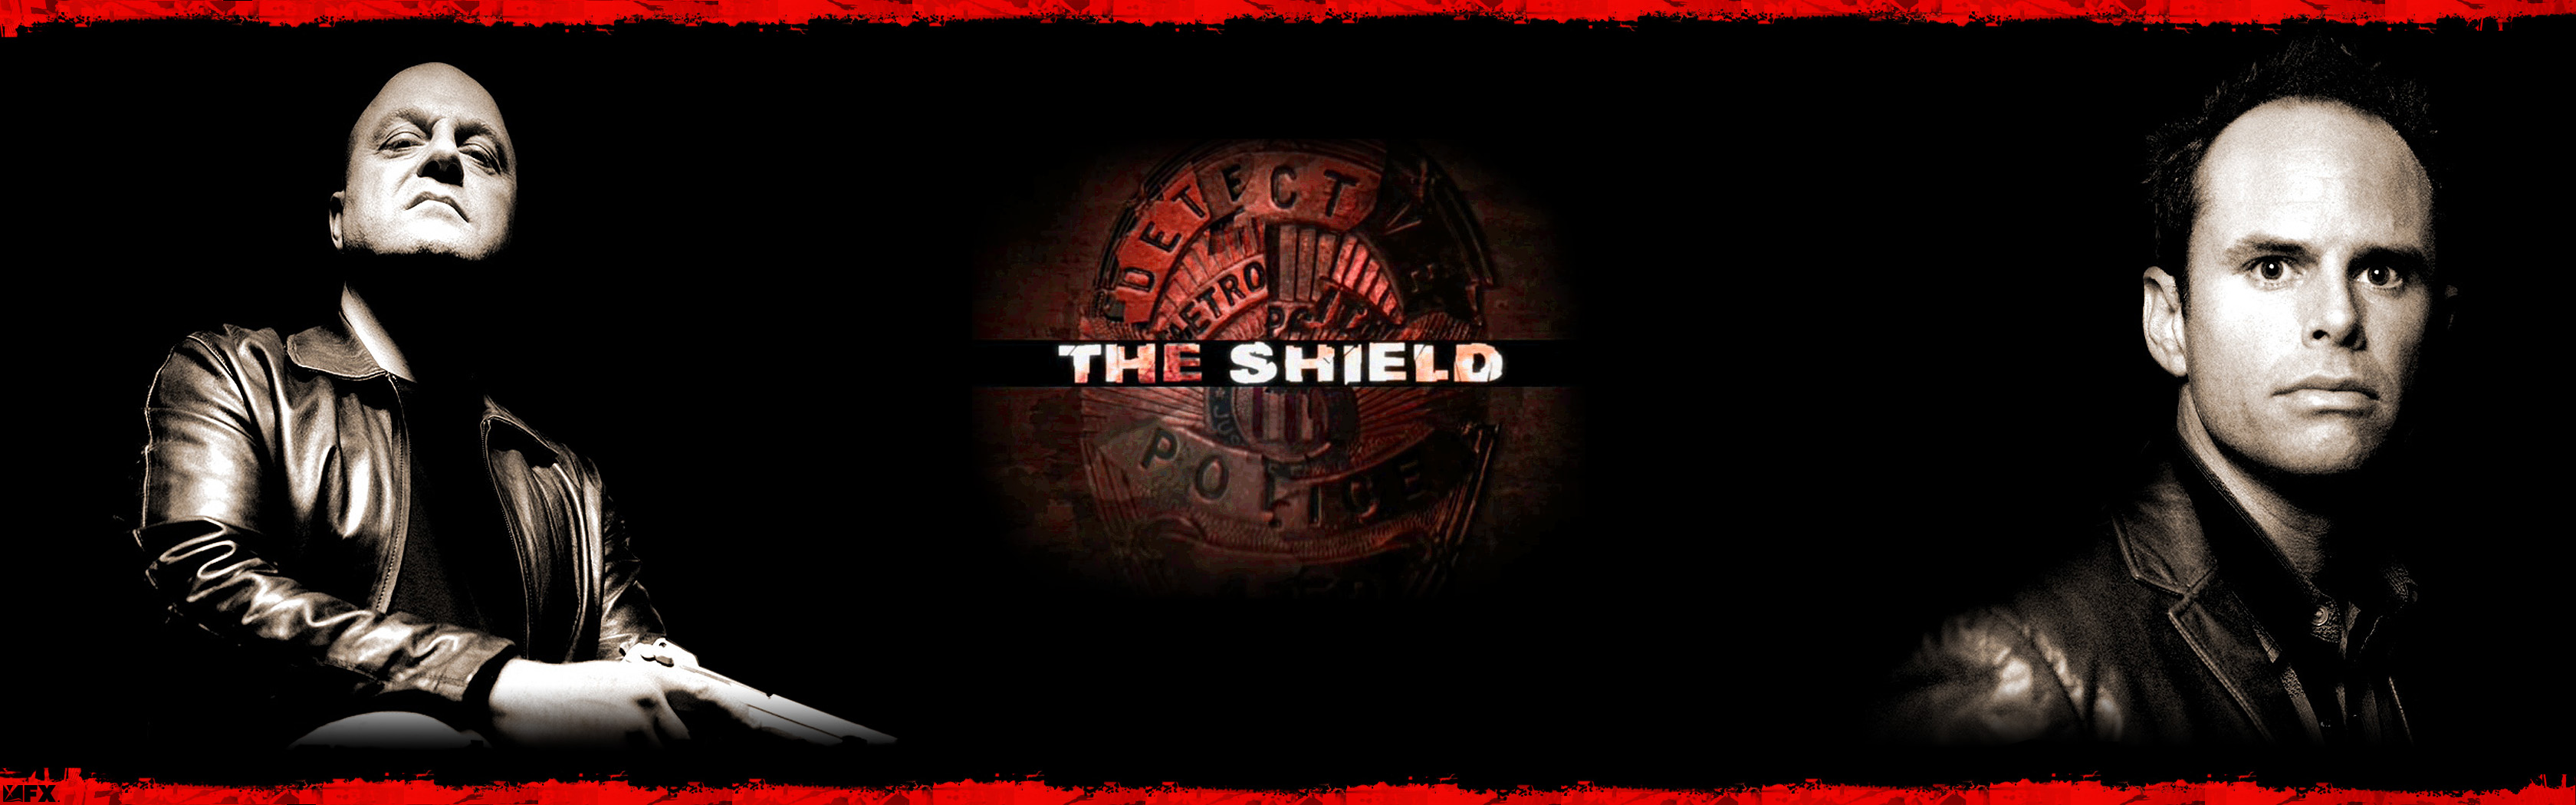 TV Show The Shield HD Wallpaper | Background Image